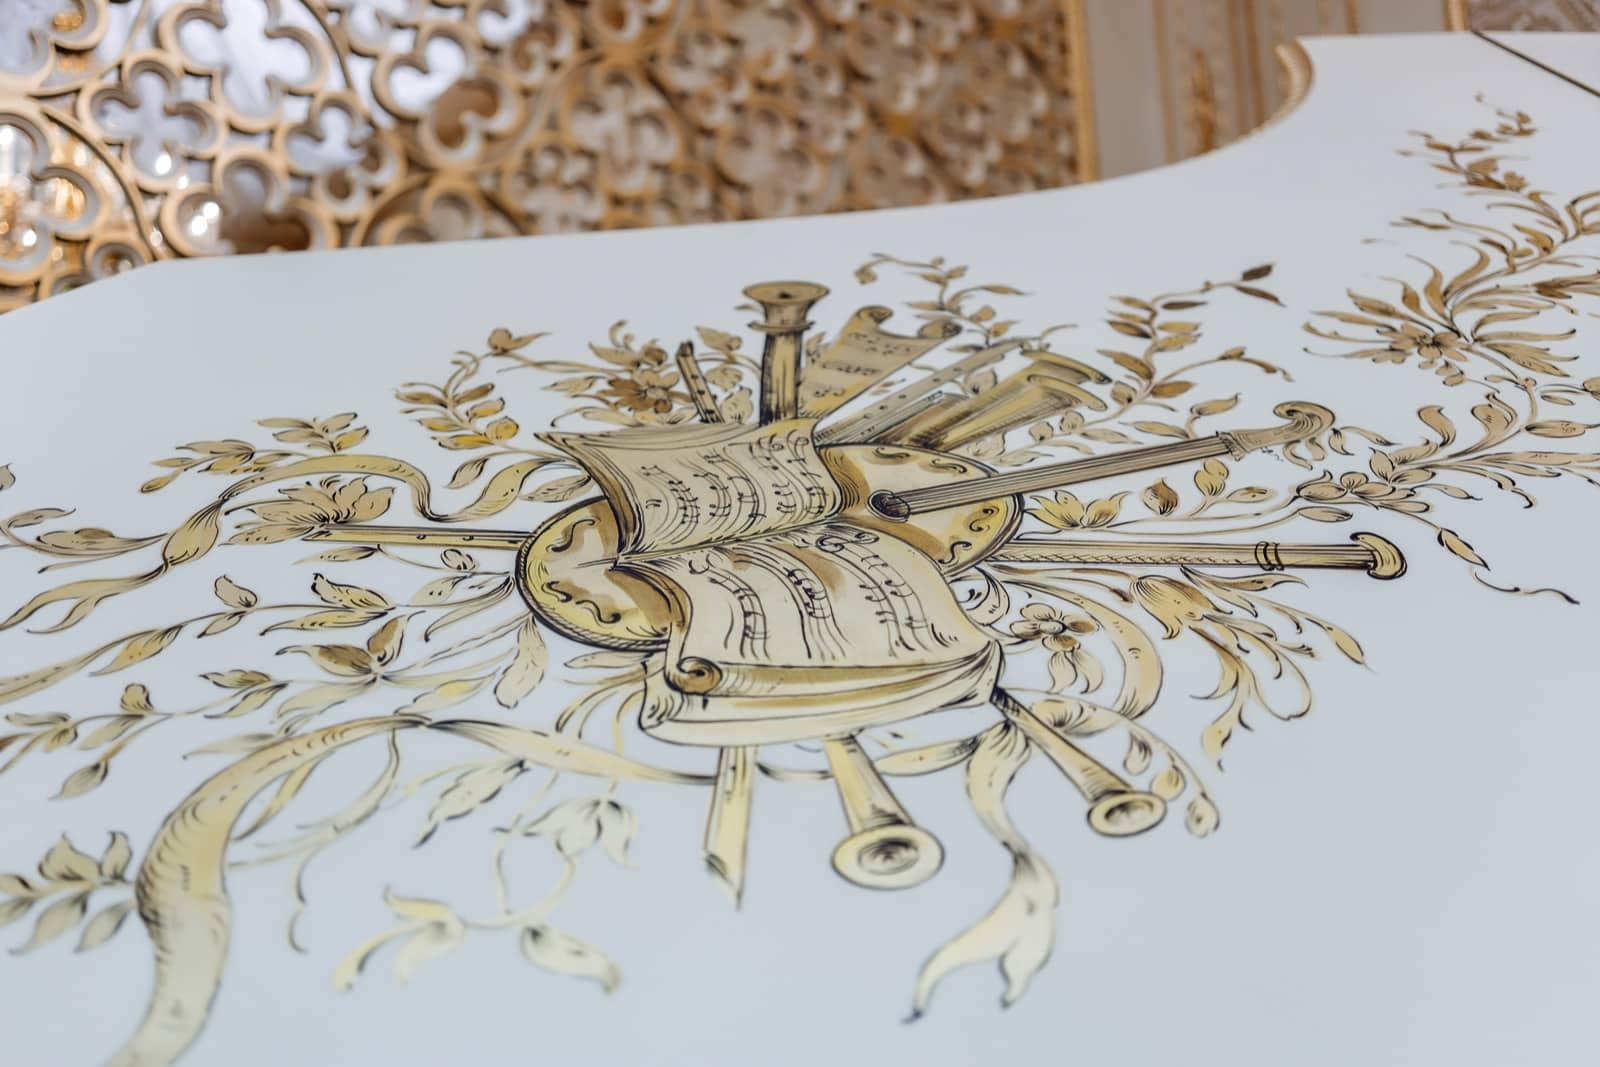 craftmanship handmade painted designs details elegant painting golden leaf application artisans Italian production decorative ideas solutions for luxury home royal villa residential palace projects